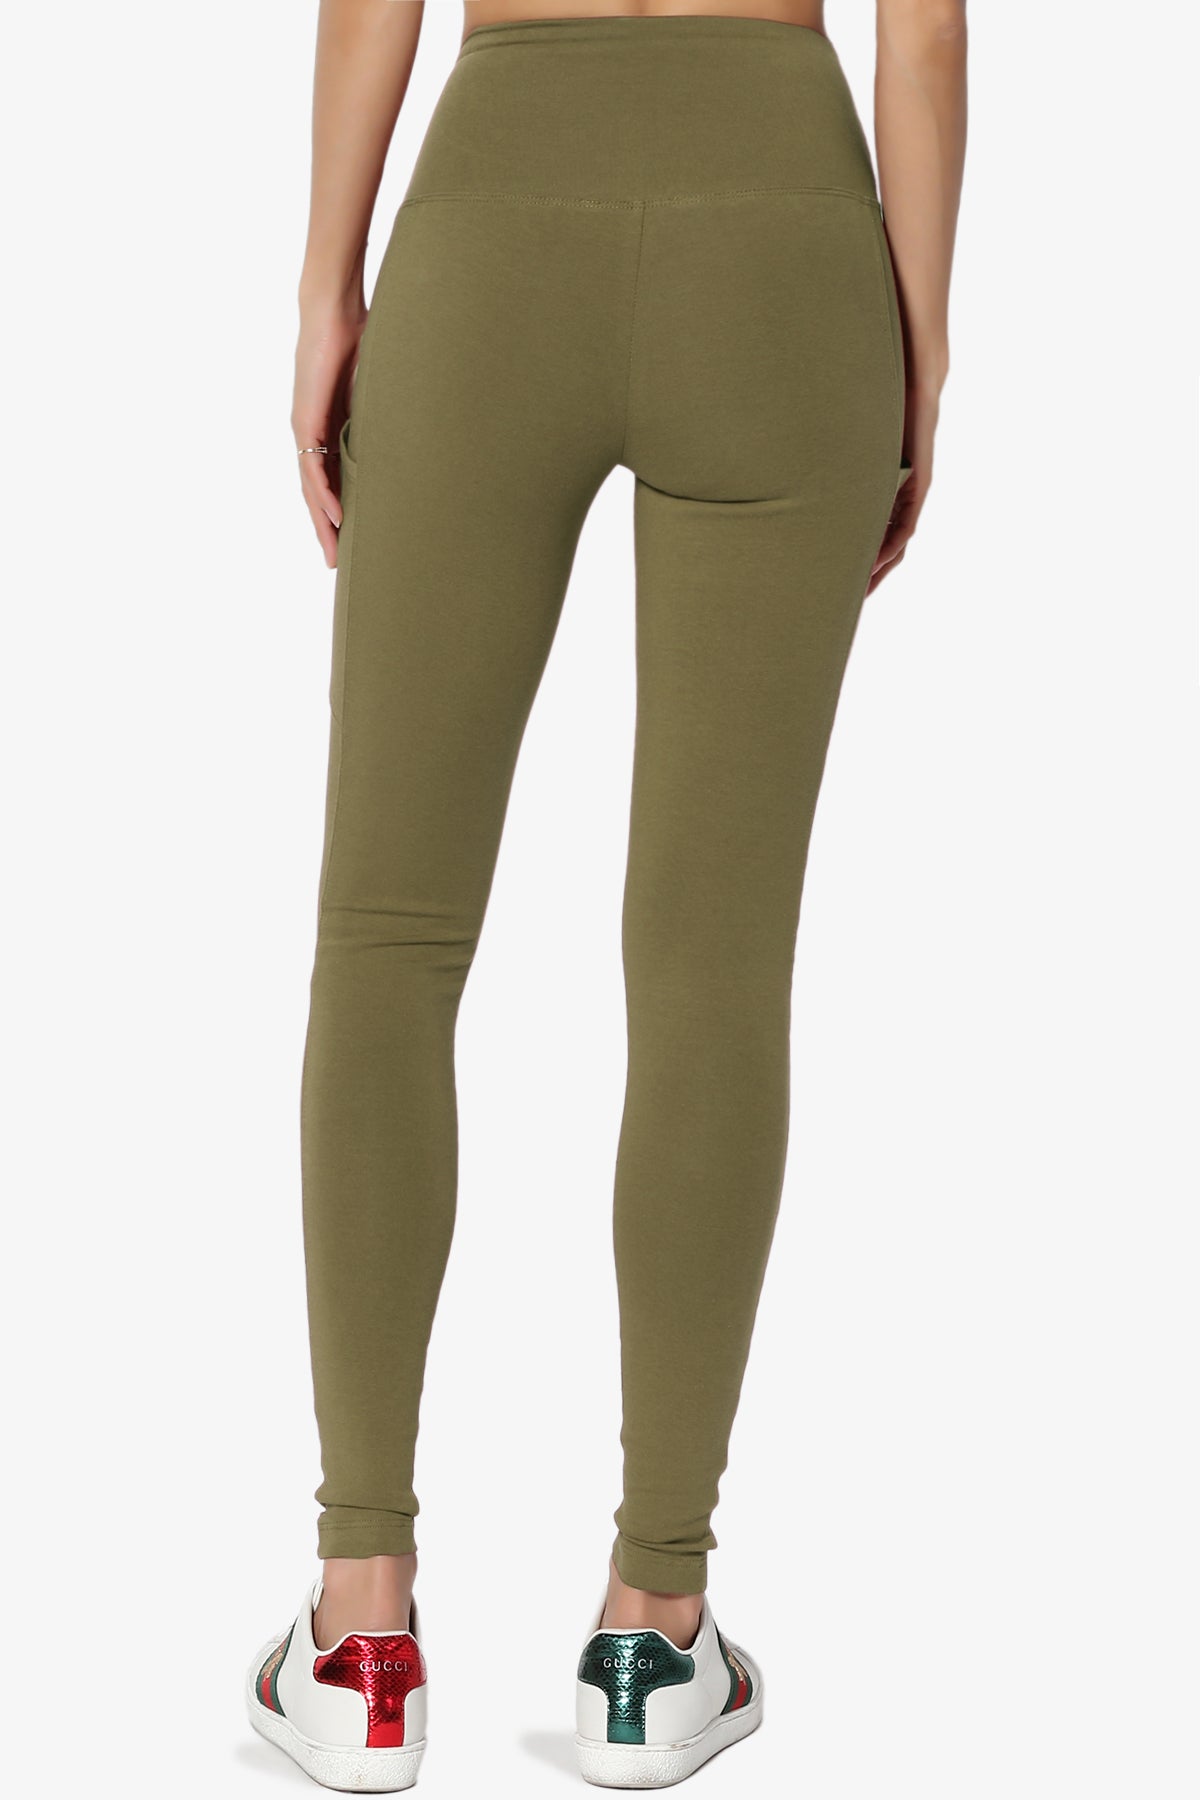 Ansley Luxe Cotton Leggings with Pockets OLIVE KHAKI_2